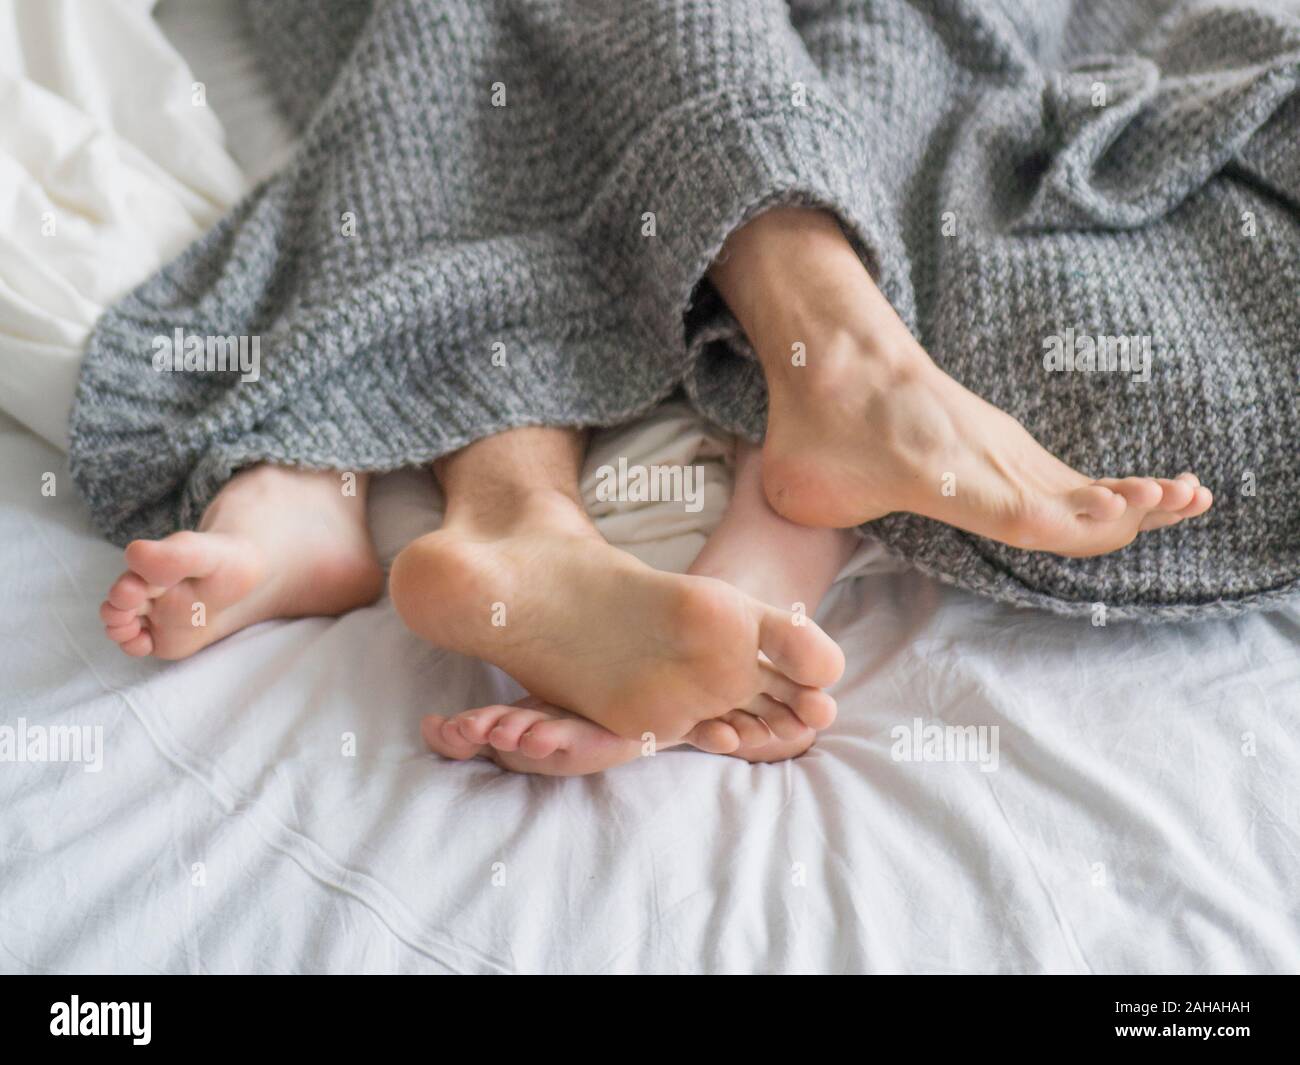 Couple sleeping in bed. Close up view of a feet of a couple. Love and relationships concept. Stock Photo